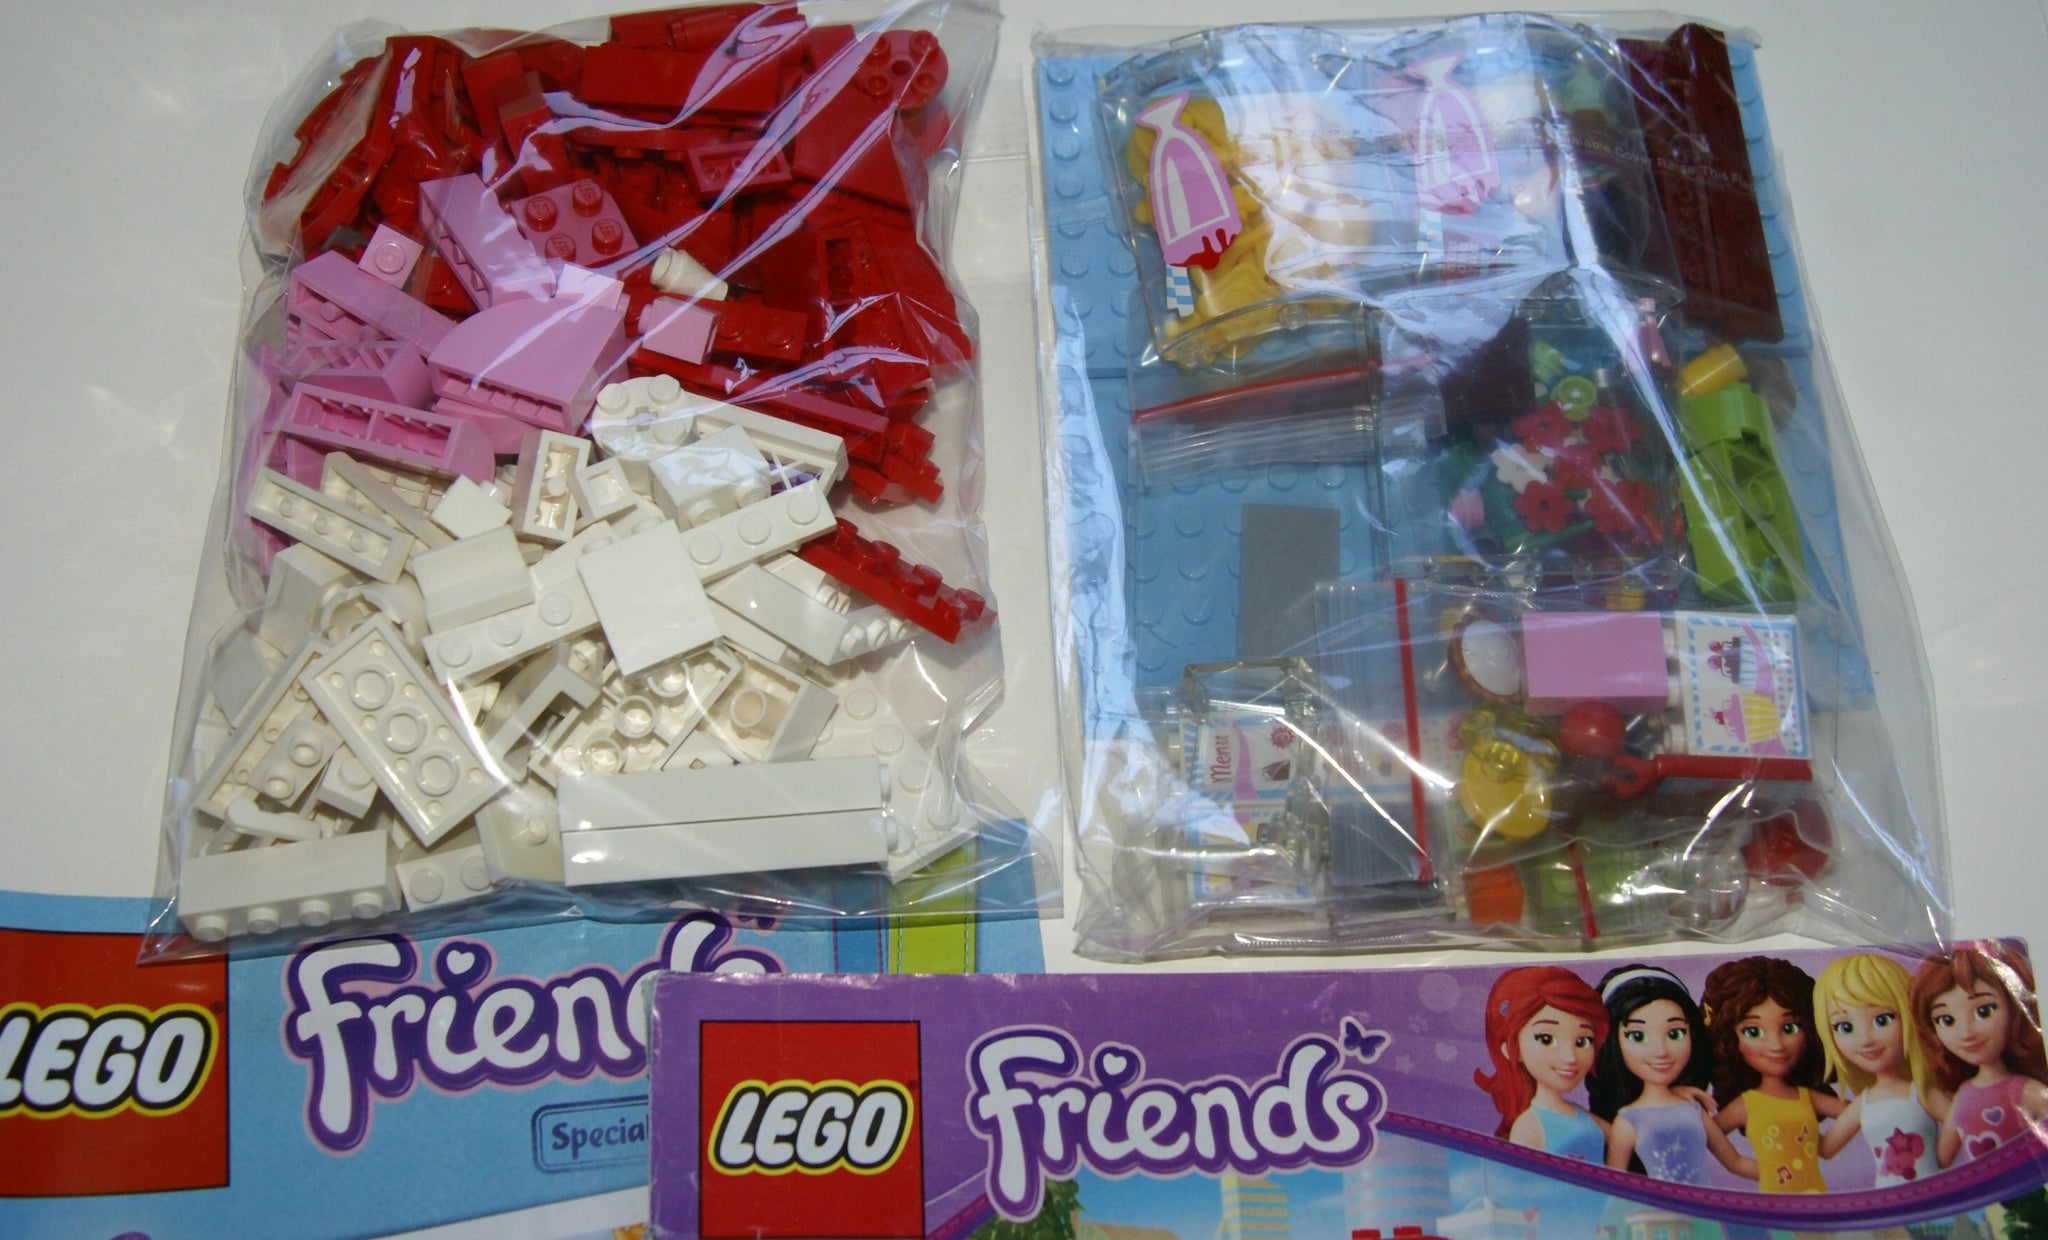 LEGO FRIENDS: City Park Cafe (3061) Pre-Owned w/box instructions